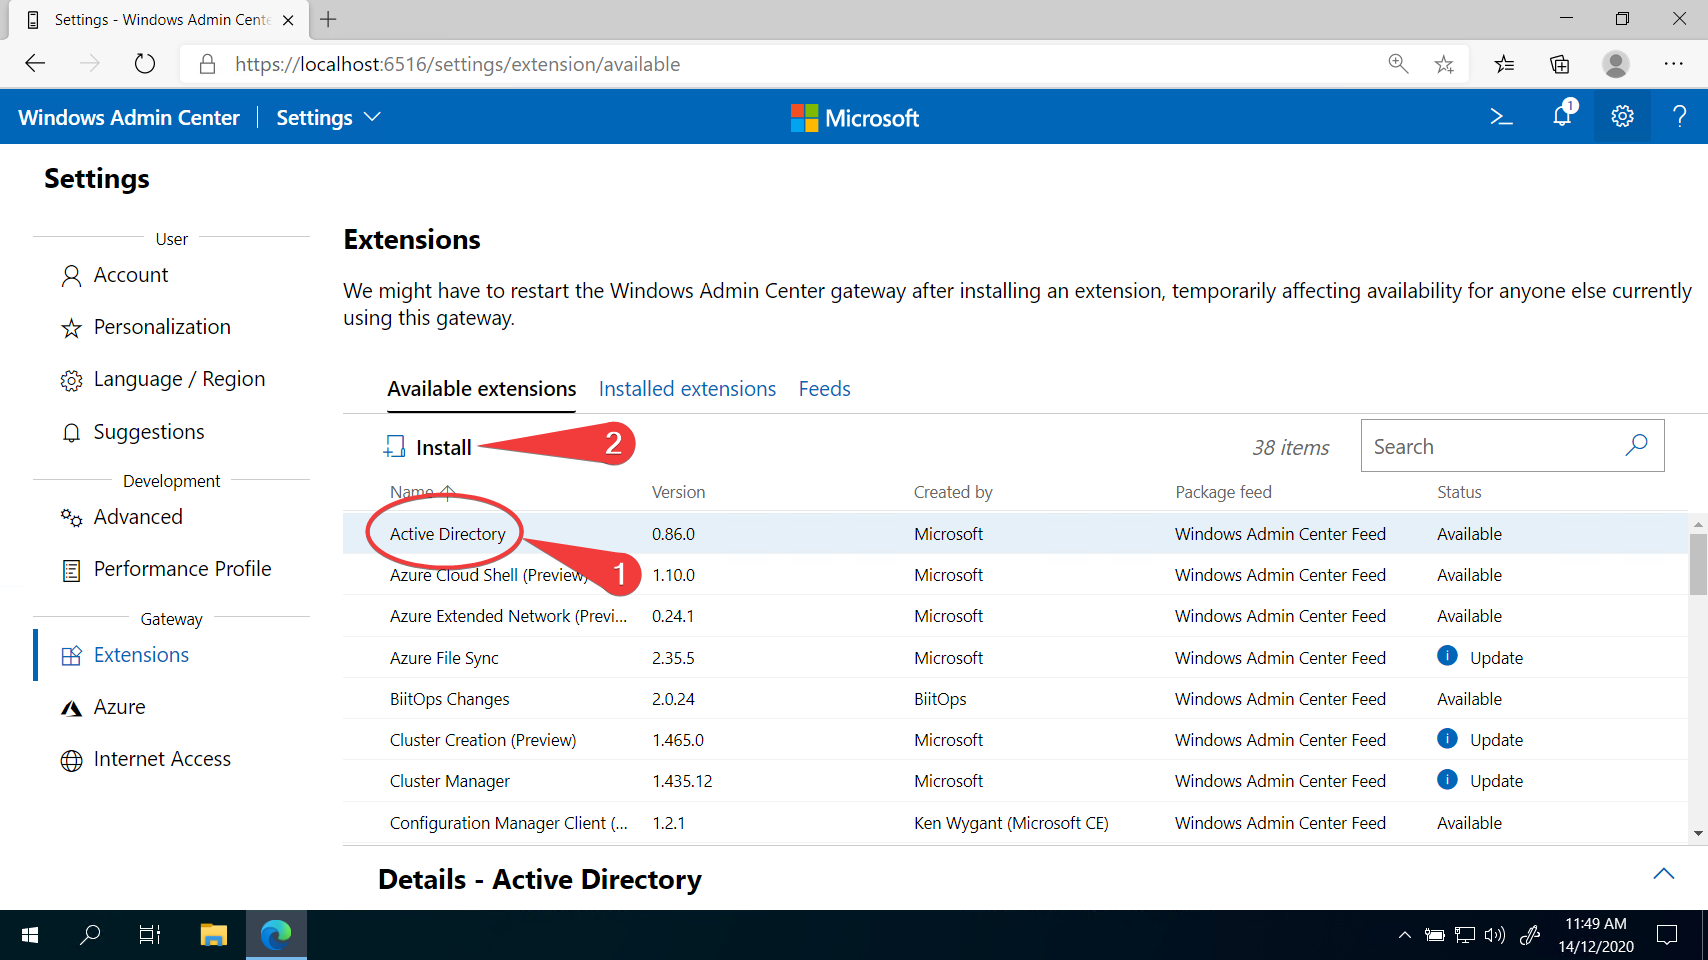 Adding the Active Directory Extension 